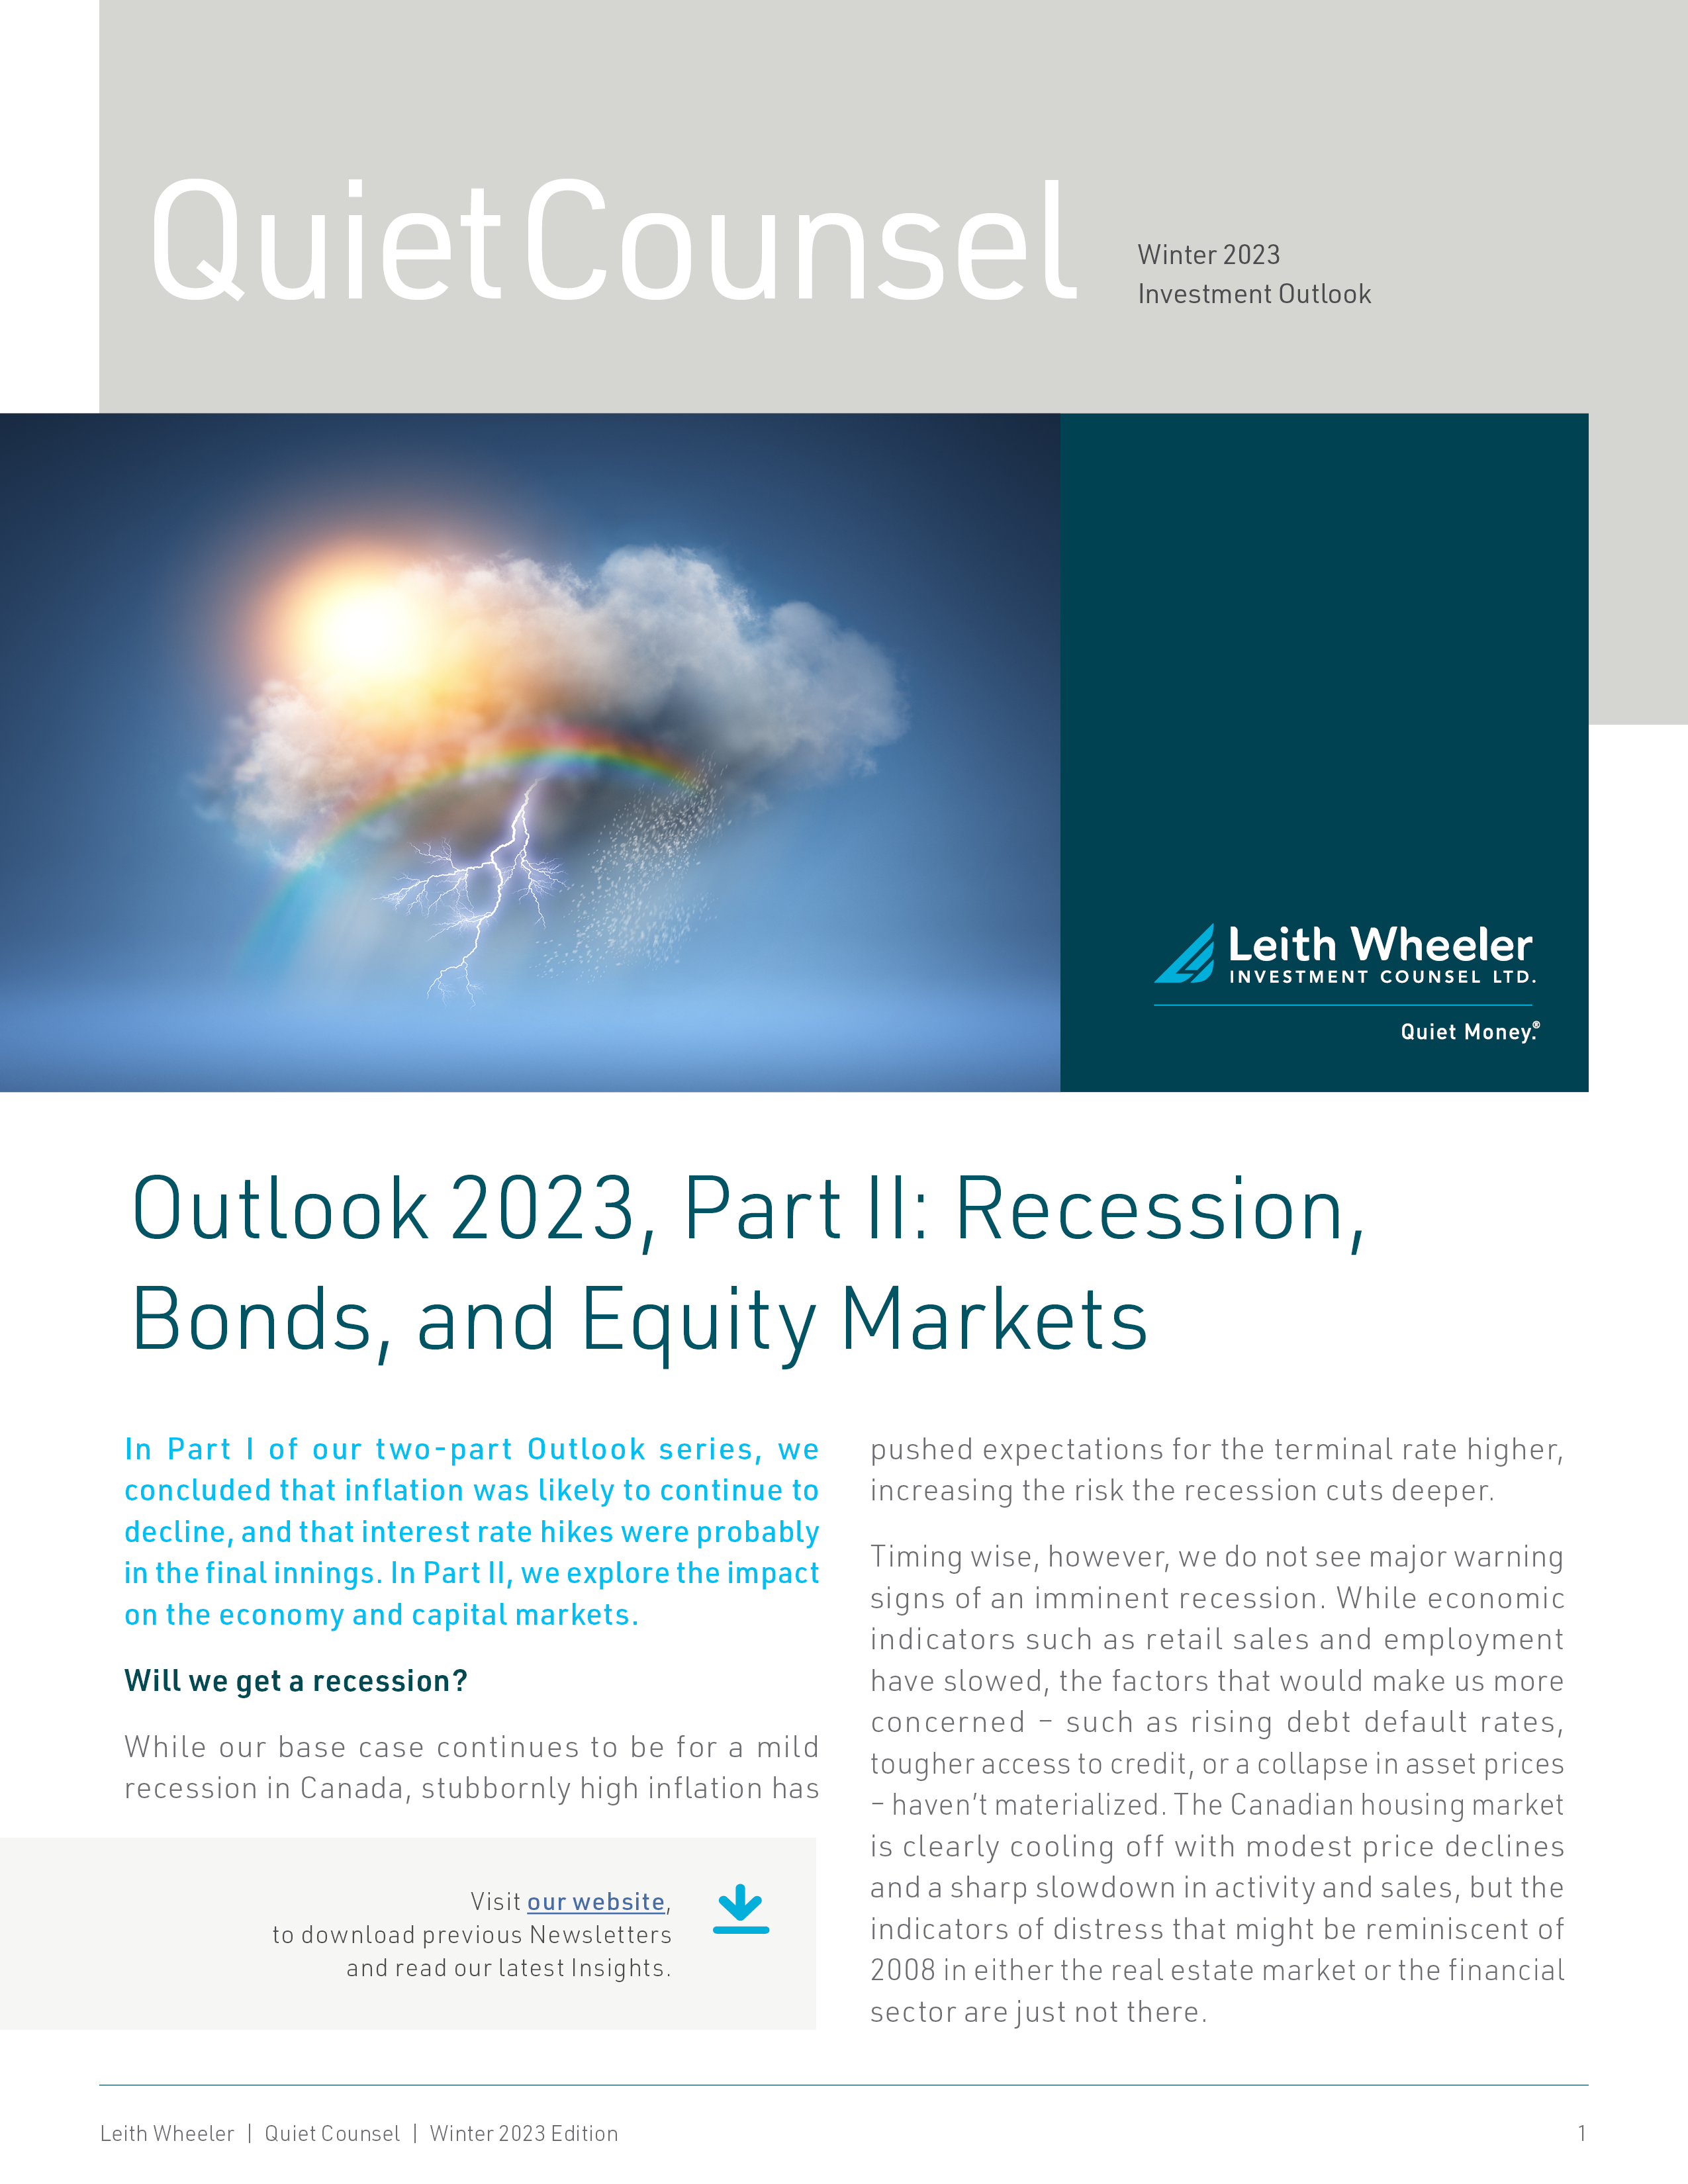 Outlook 2023, Part II Recession, Bonds, and Equity Markets